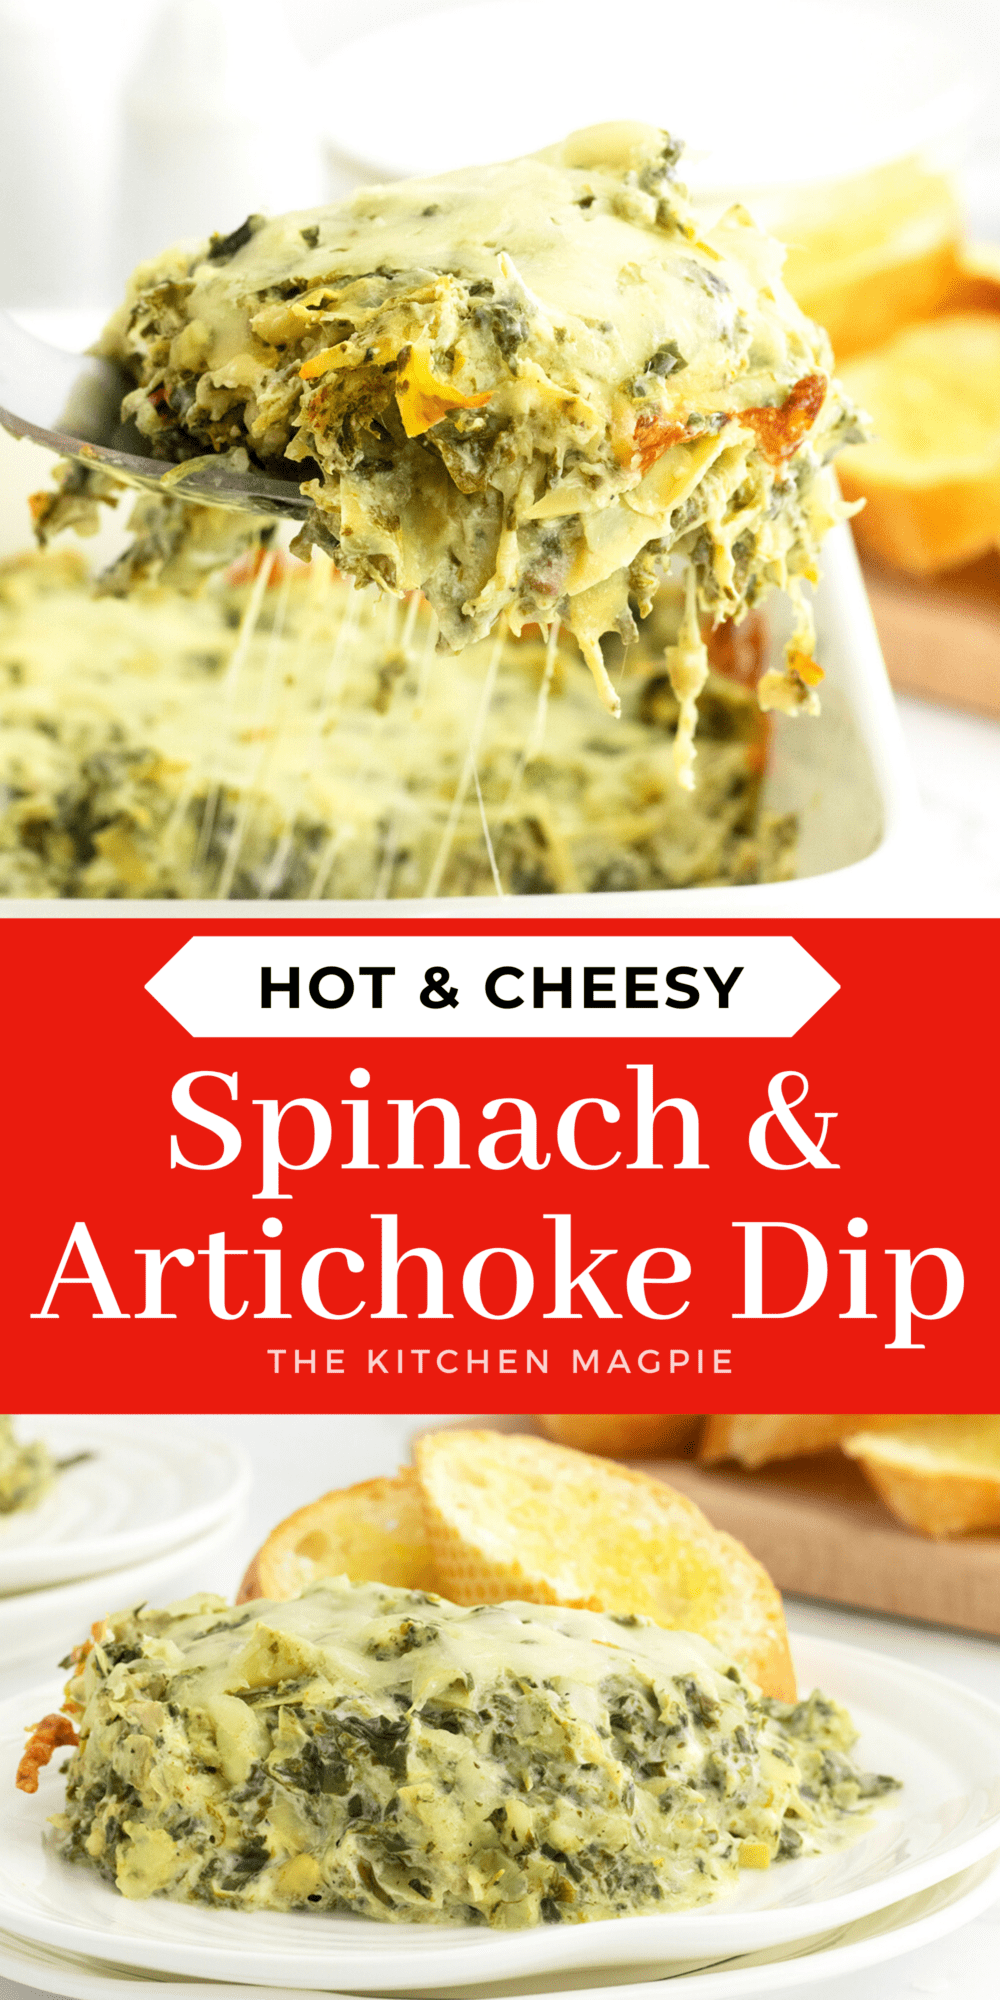 Hot spinach and artichoke dip just loaded up with melted cheese.